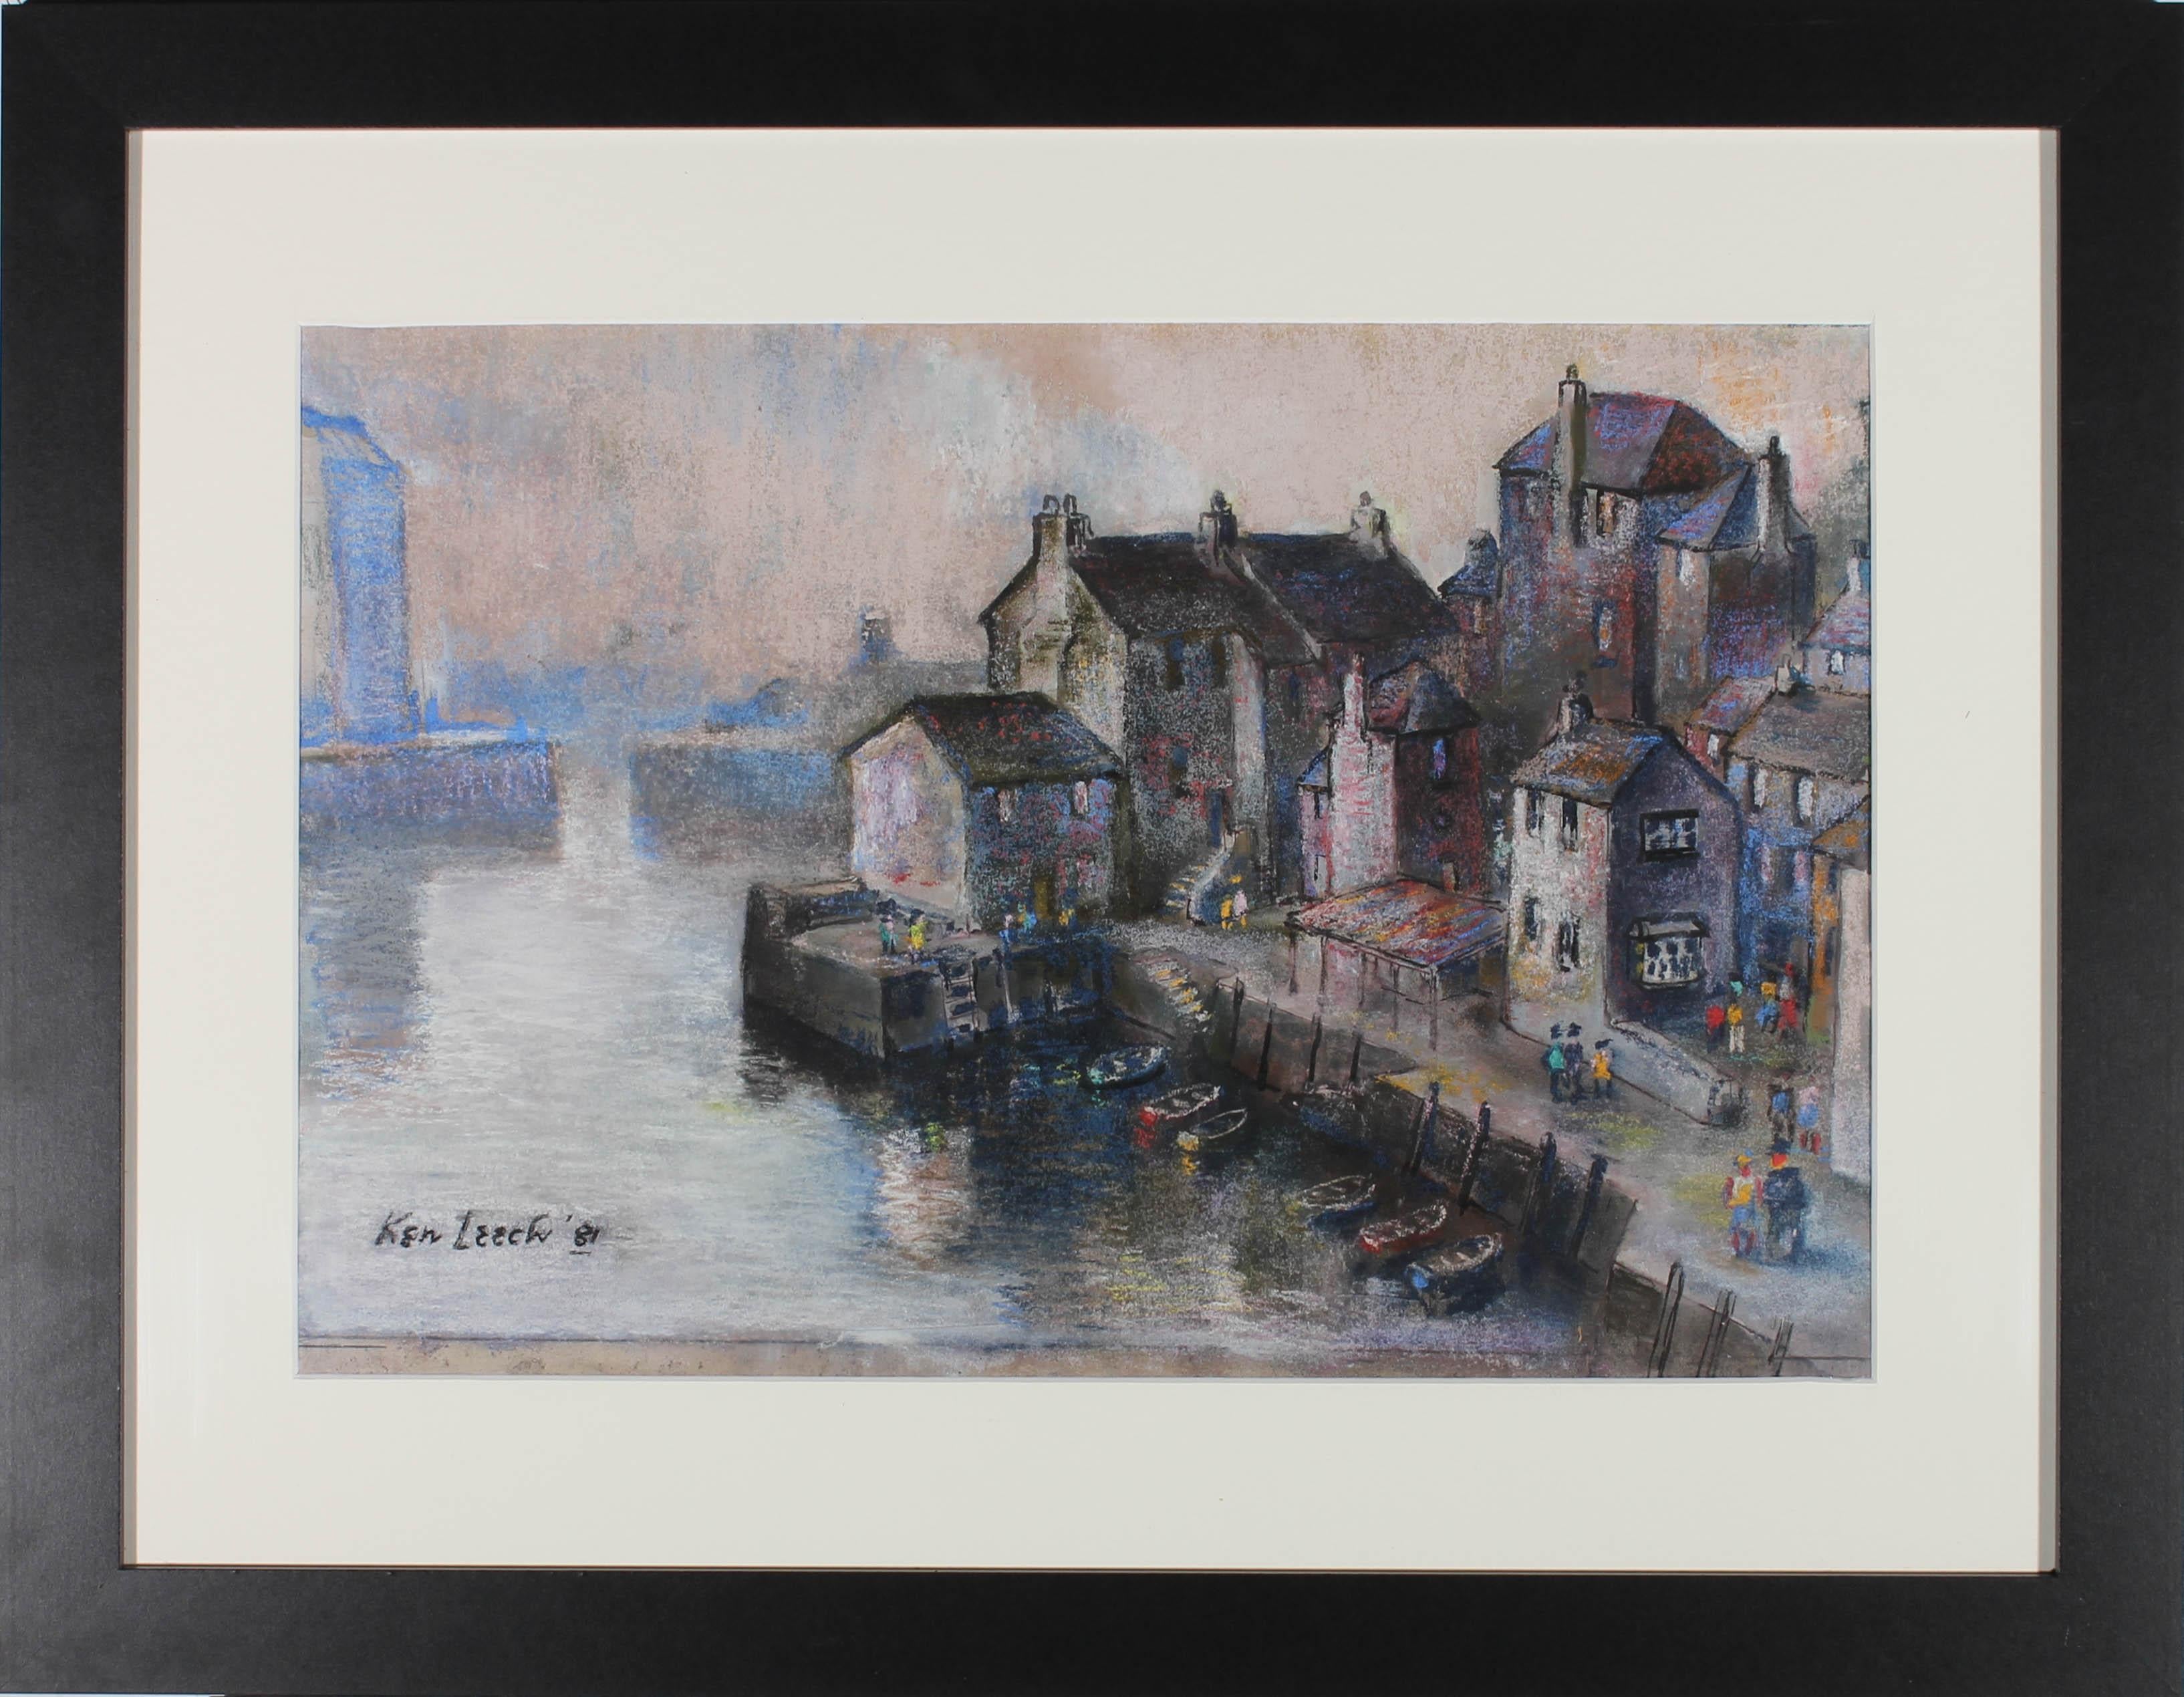 A mesmerising harbour scene in pastels by Ken Leech, full of light and shade. Pops of primary colour suggest figures leisurely walking along the harbour side on a late summer evening. Signed and dated to the lower left corner. The picture is well